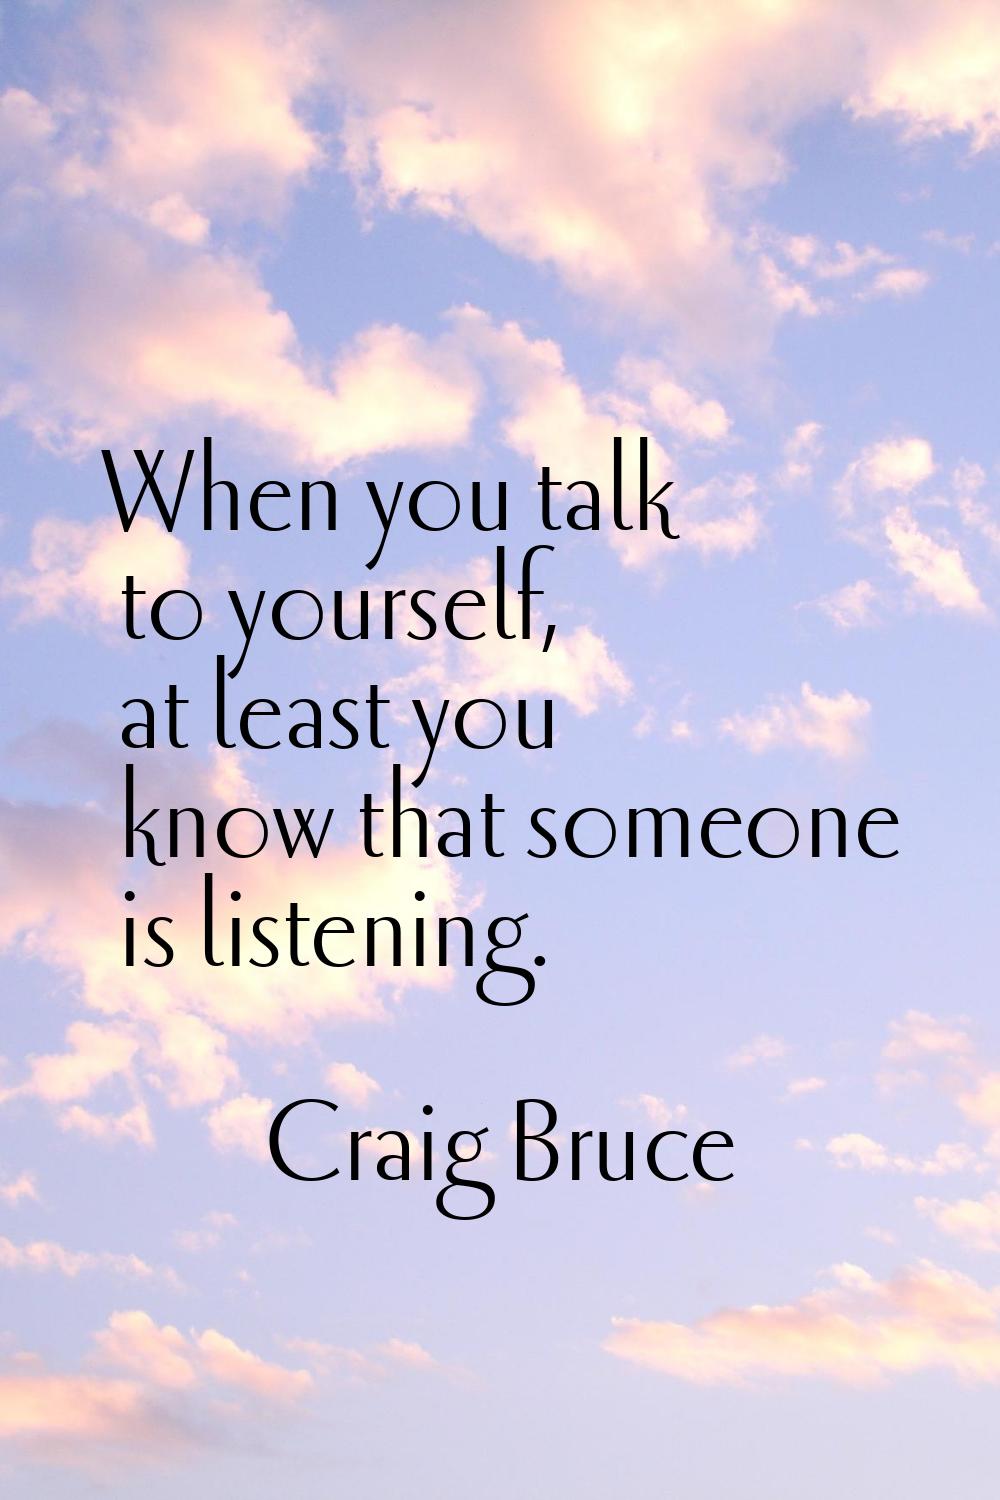 When you talk to yourself, at least you know that someone is listening.